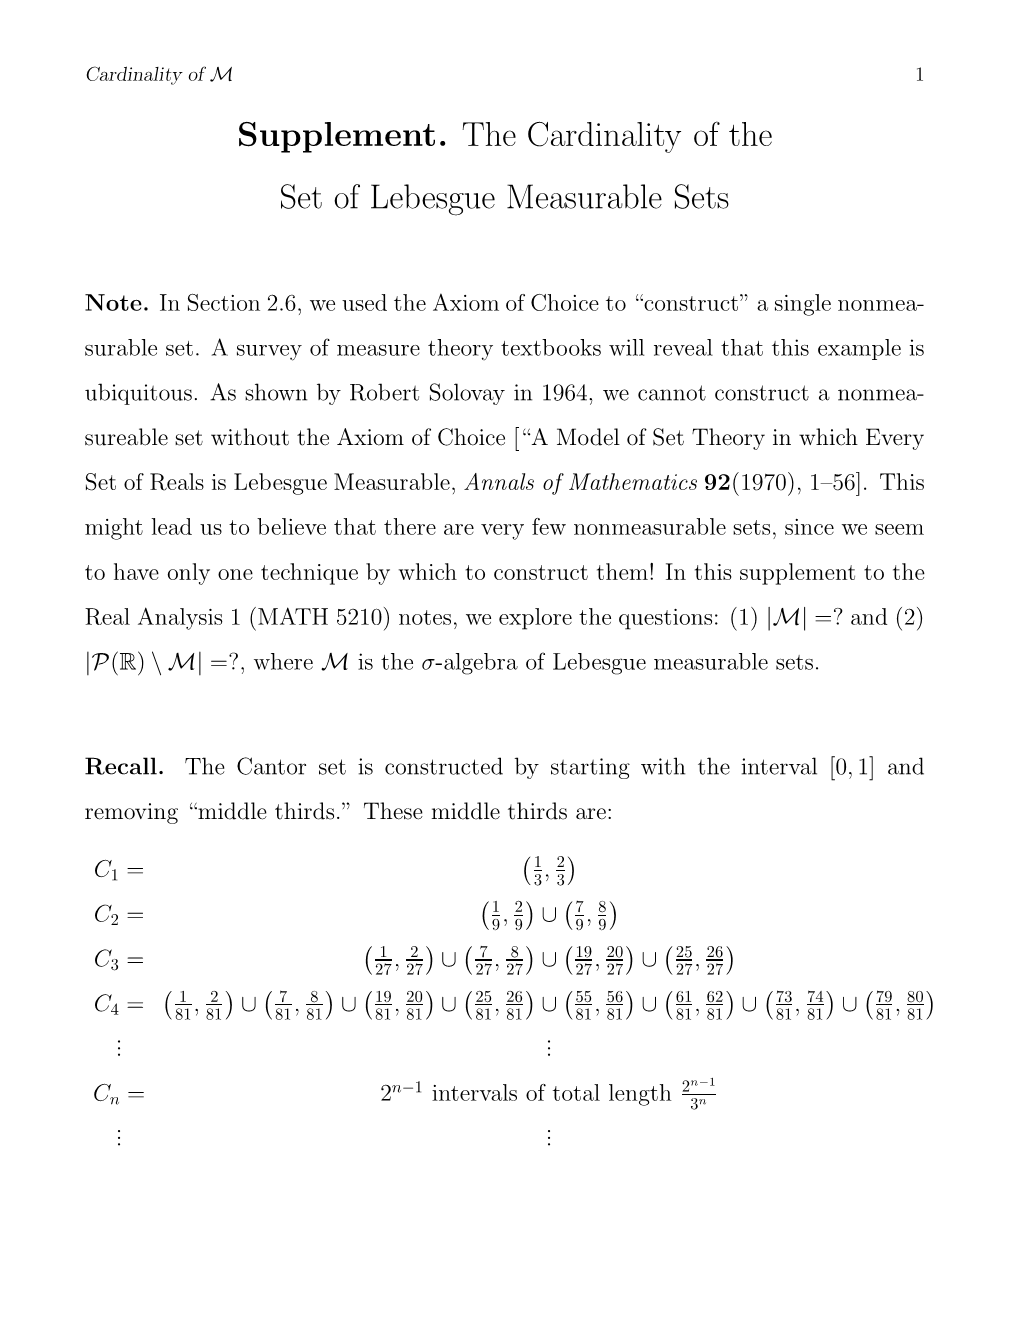 Supplement. the Cardinality of the Set of Lebesgue Measurable Sets